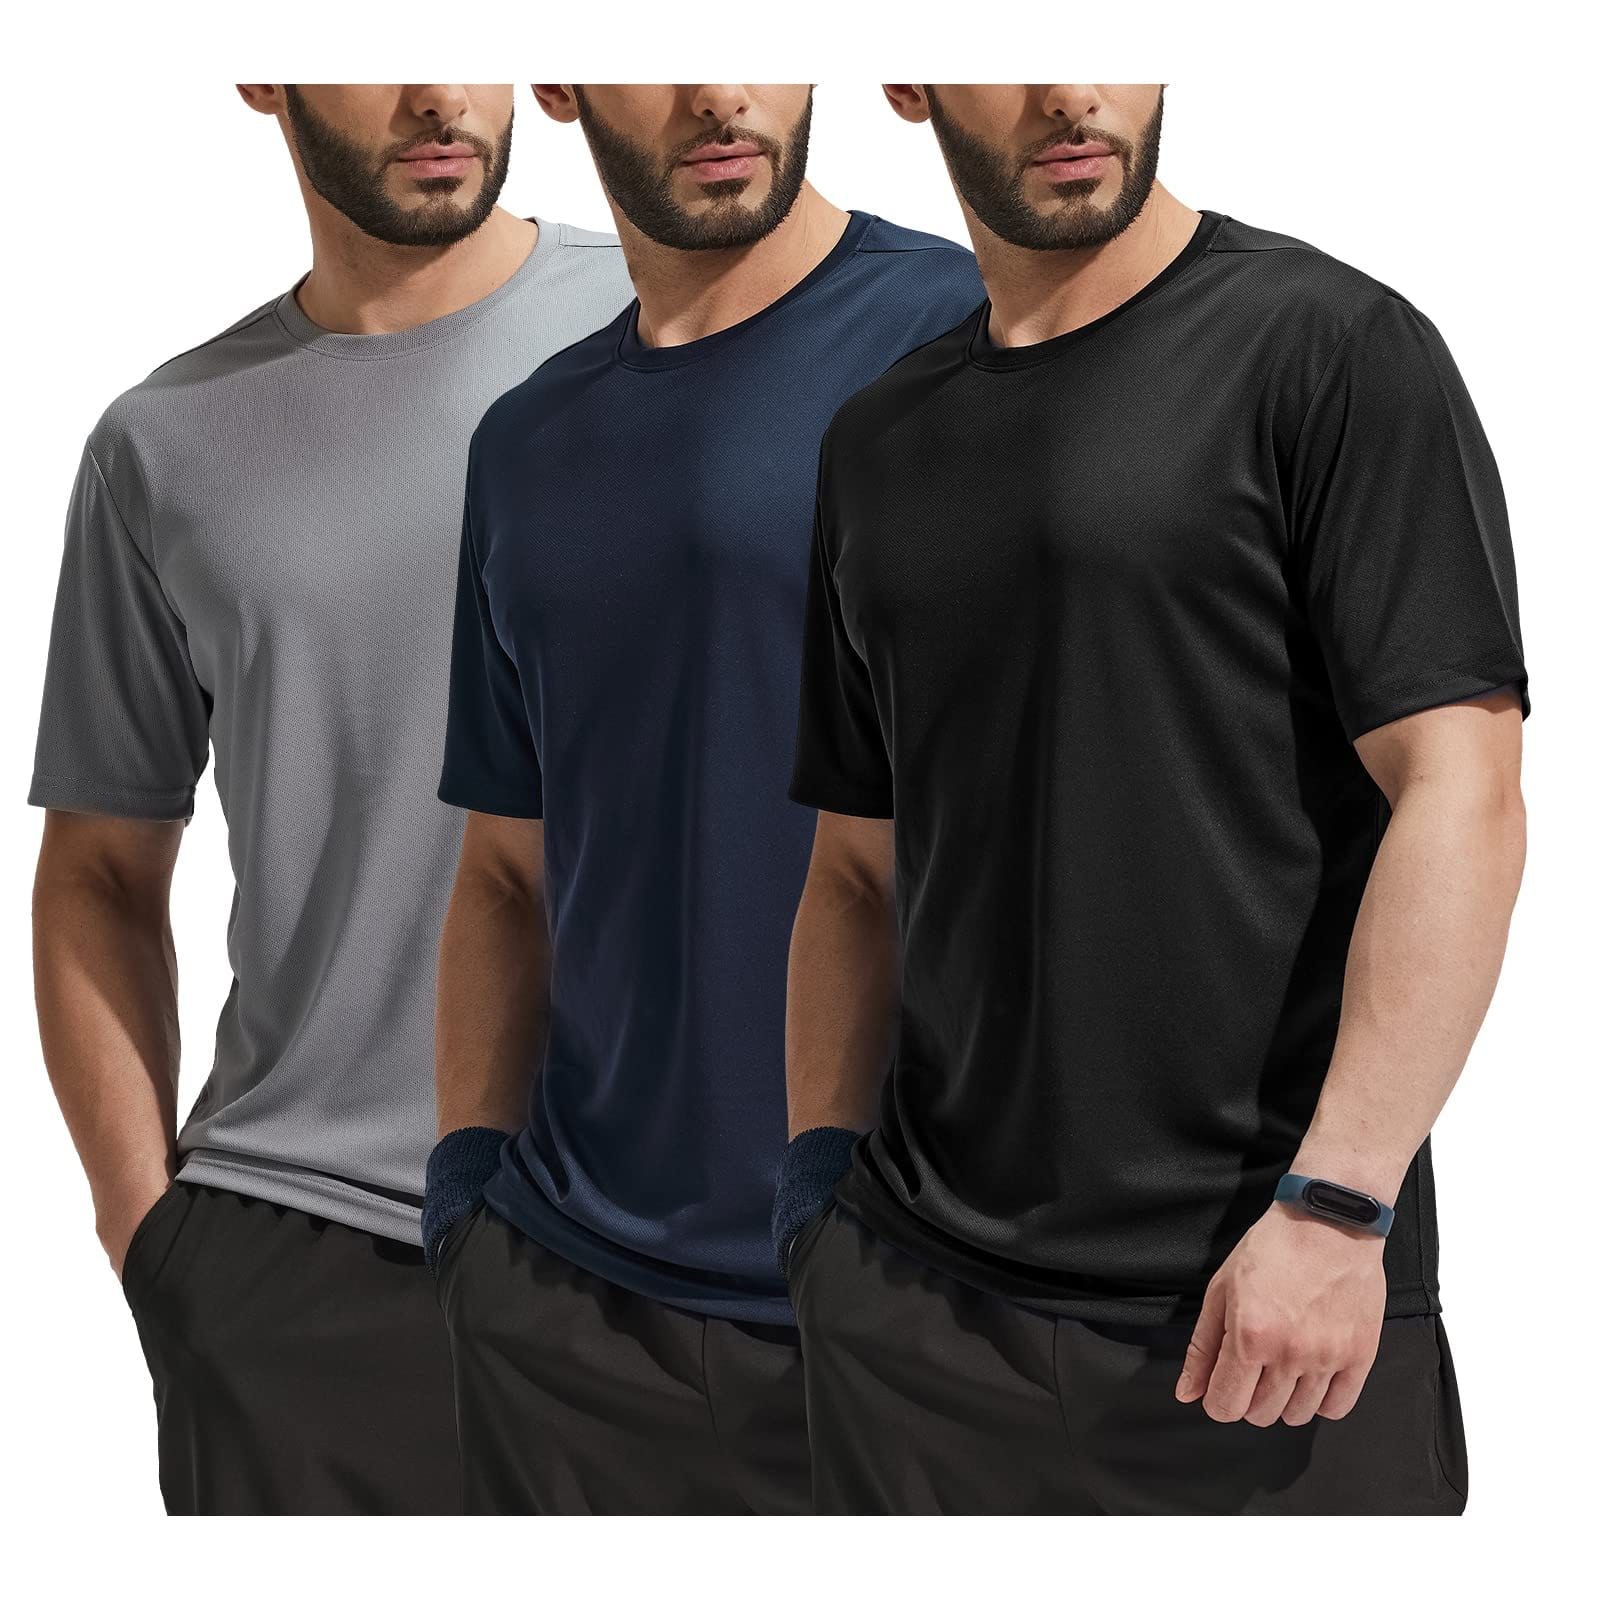 Men Dry Fit Workout T-shirts for Gym Athletic Running, 3 Pack Men Shirts Black Grey Navy / S MIER